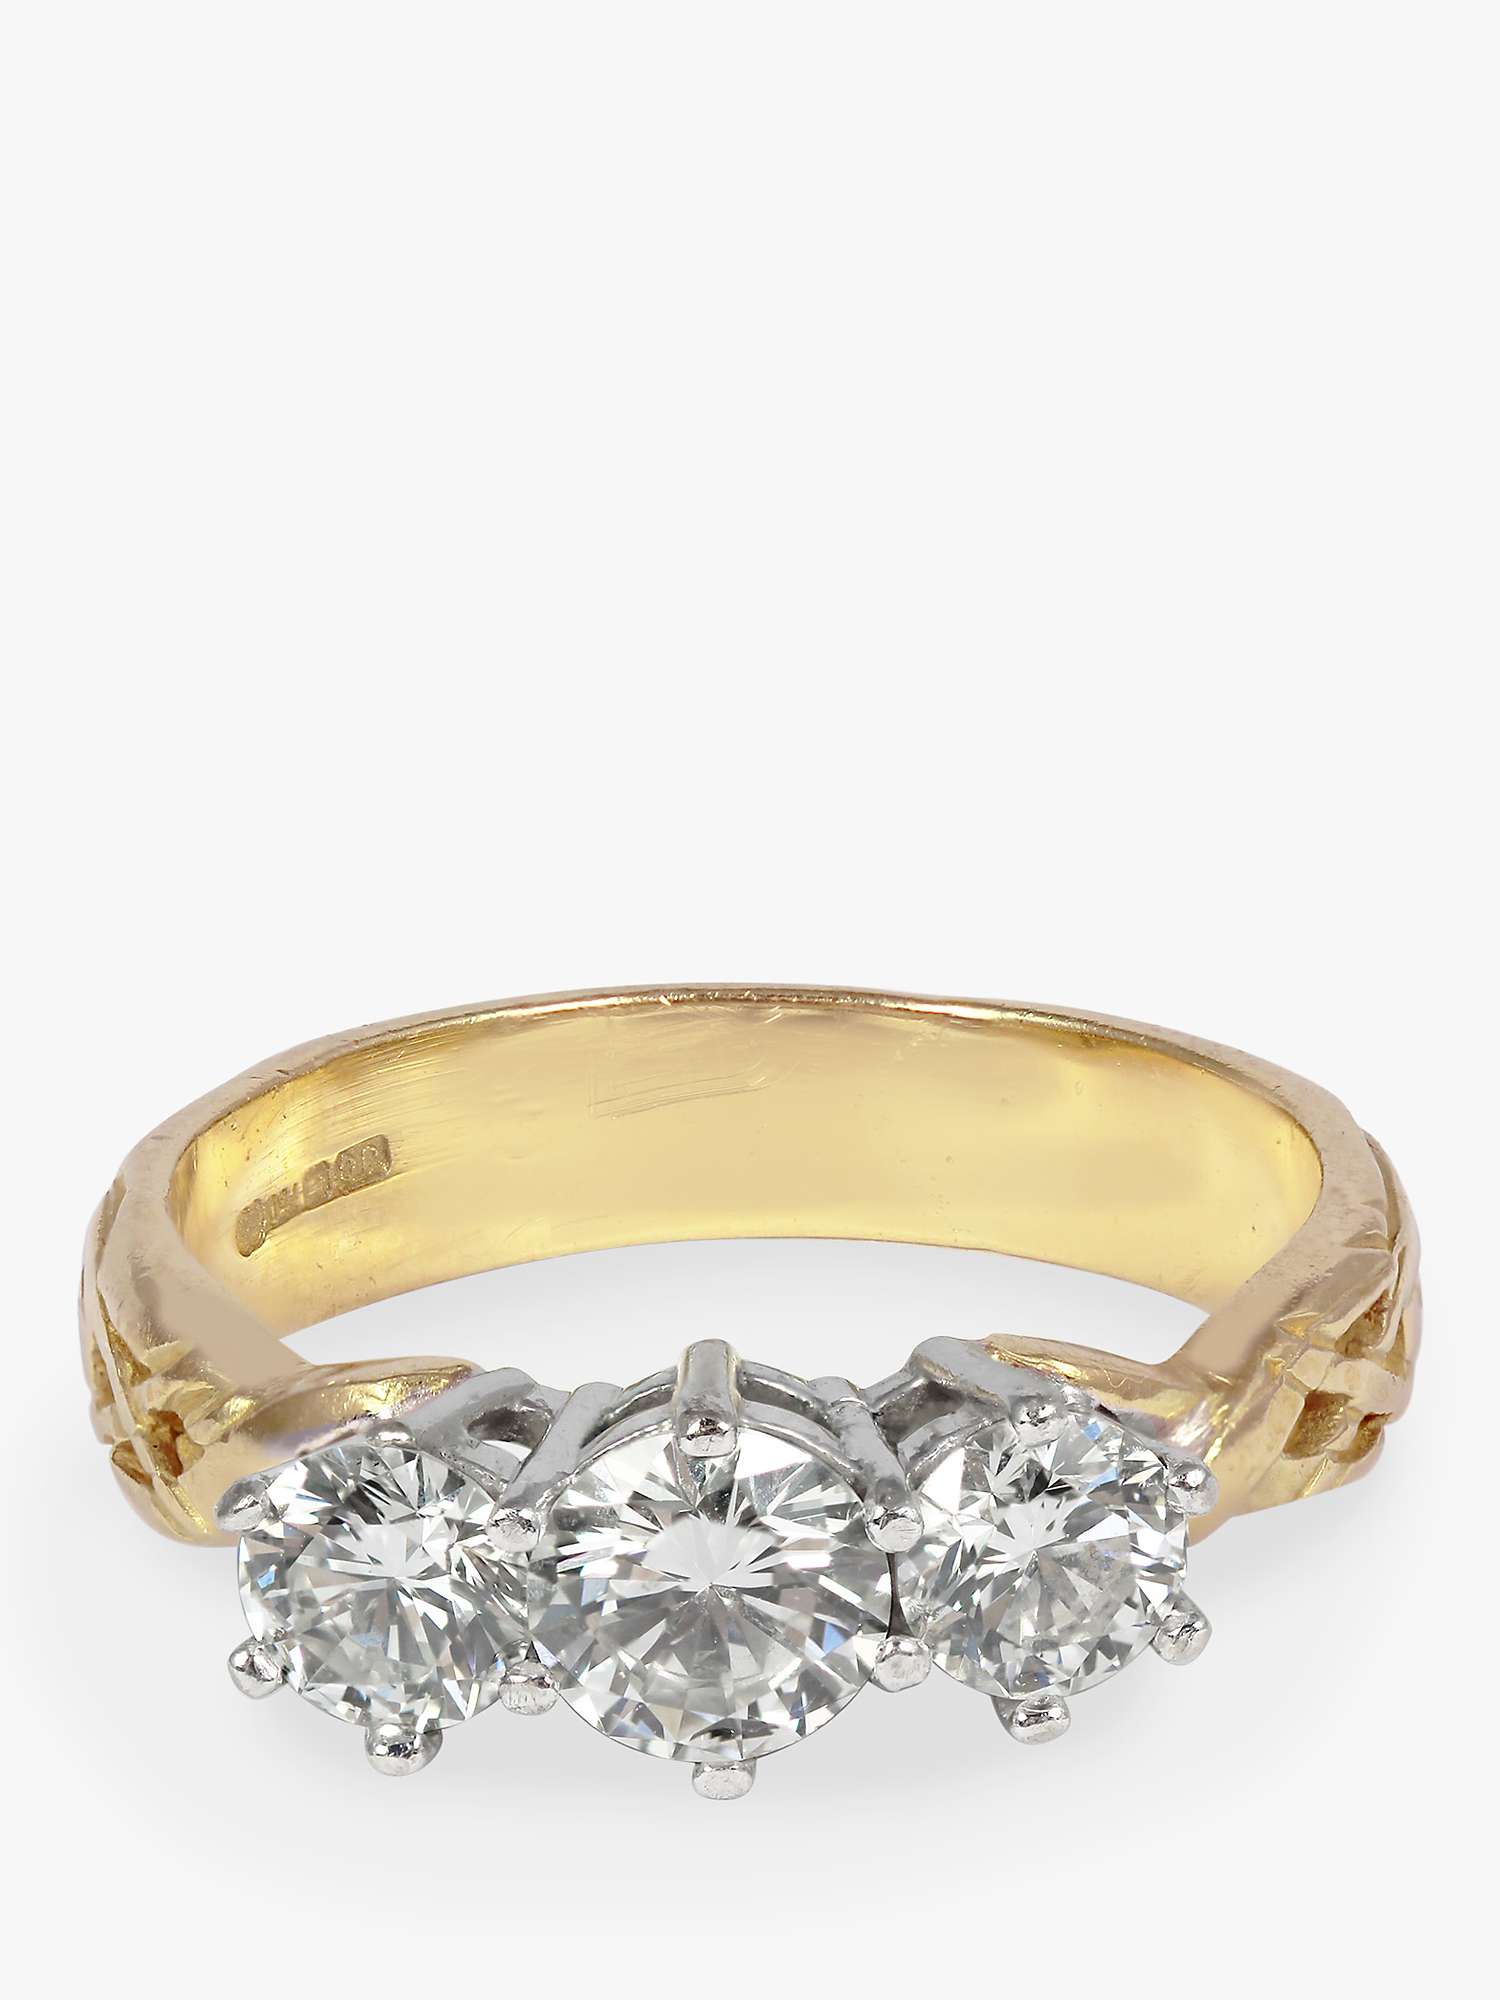 Buy Kojis 18ct Yellow and White Gold Second Hand Diamond Ring Online at johnlewis.com